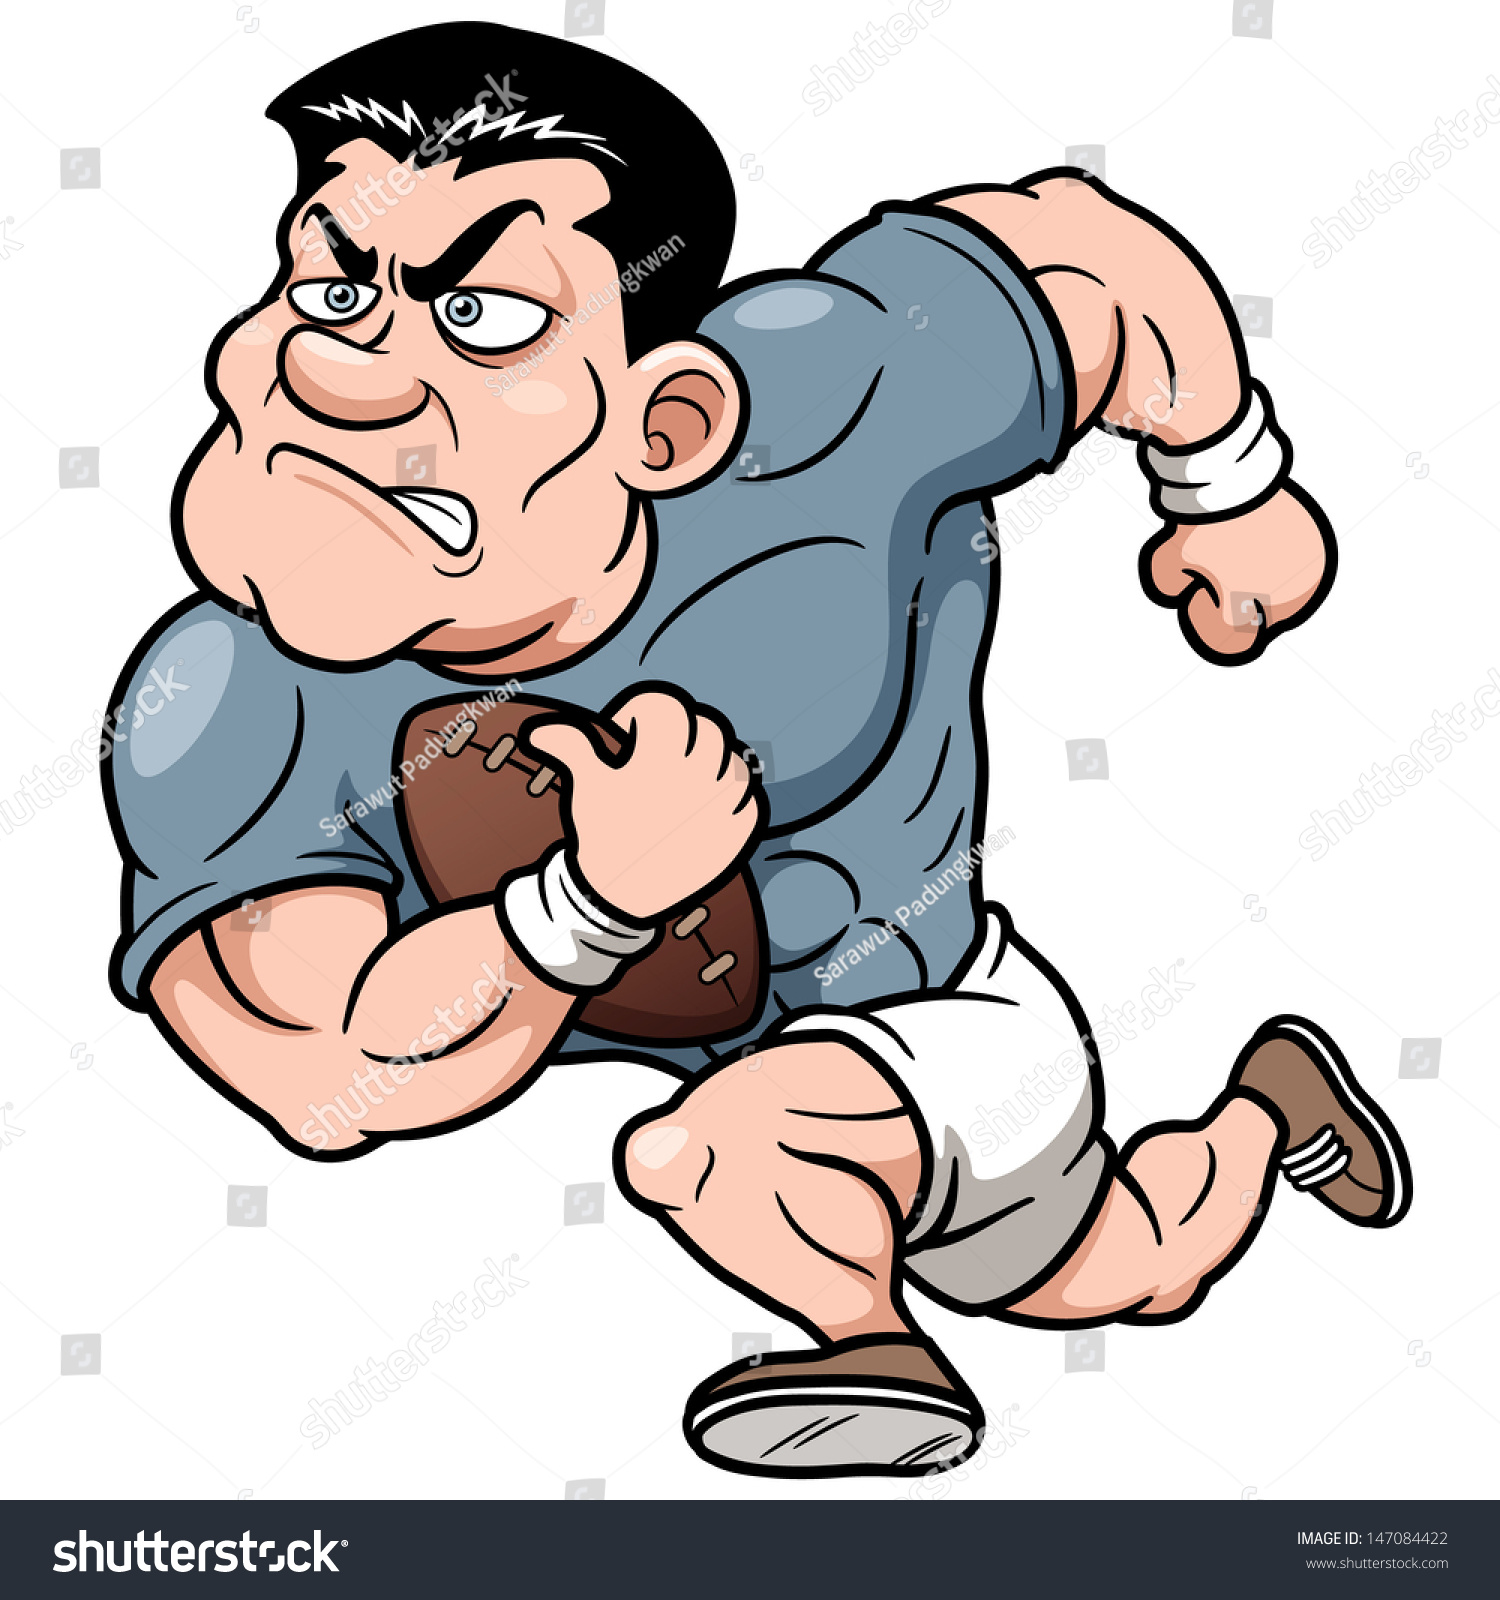 clipart rugby player - photo #32